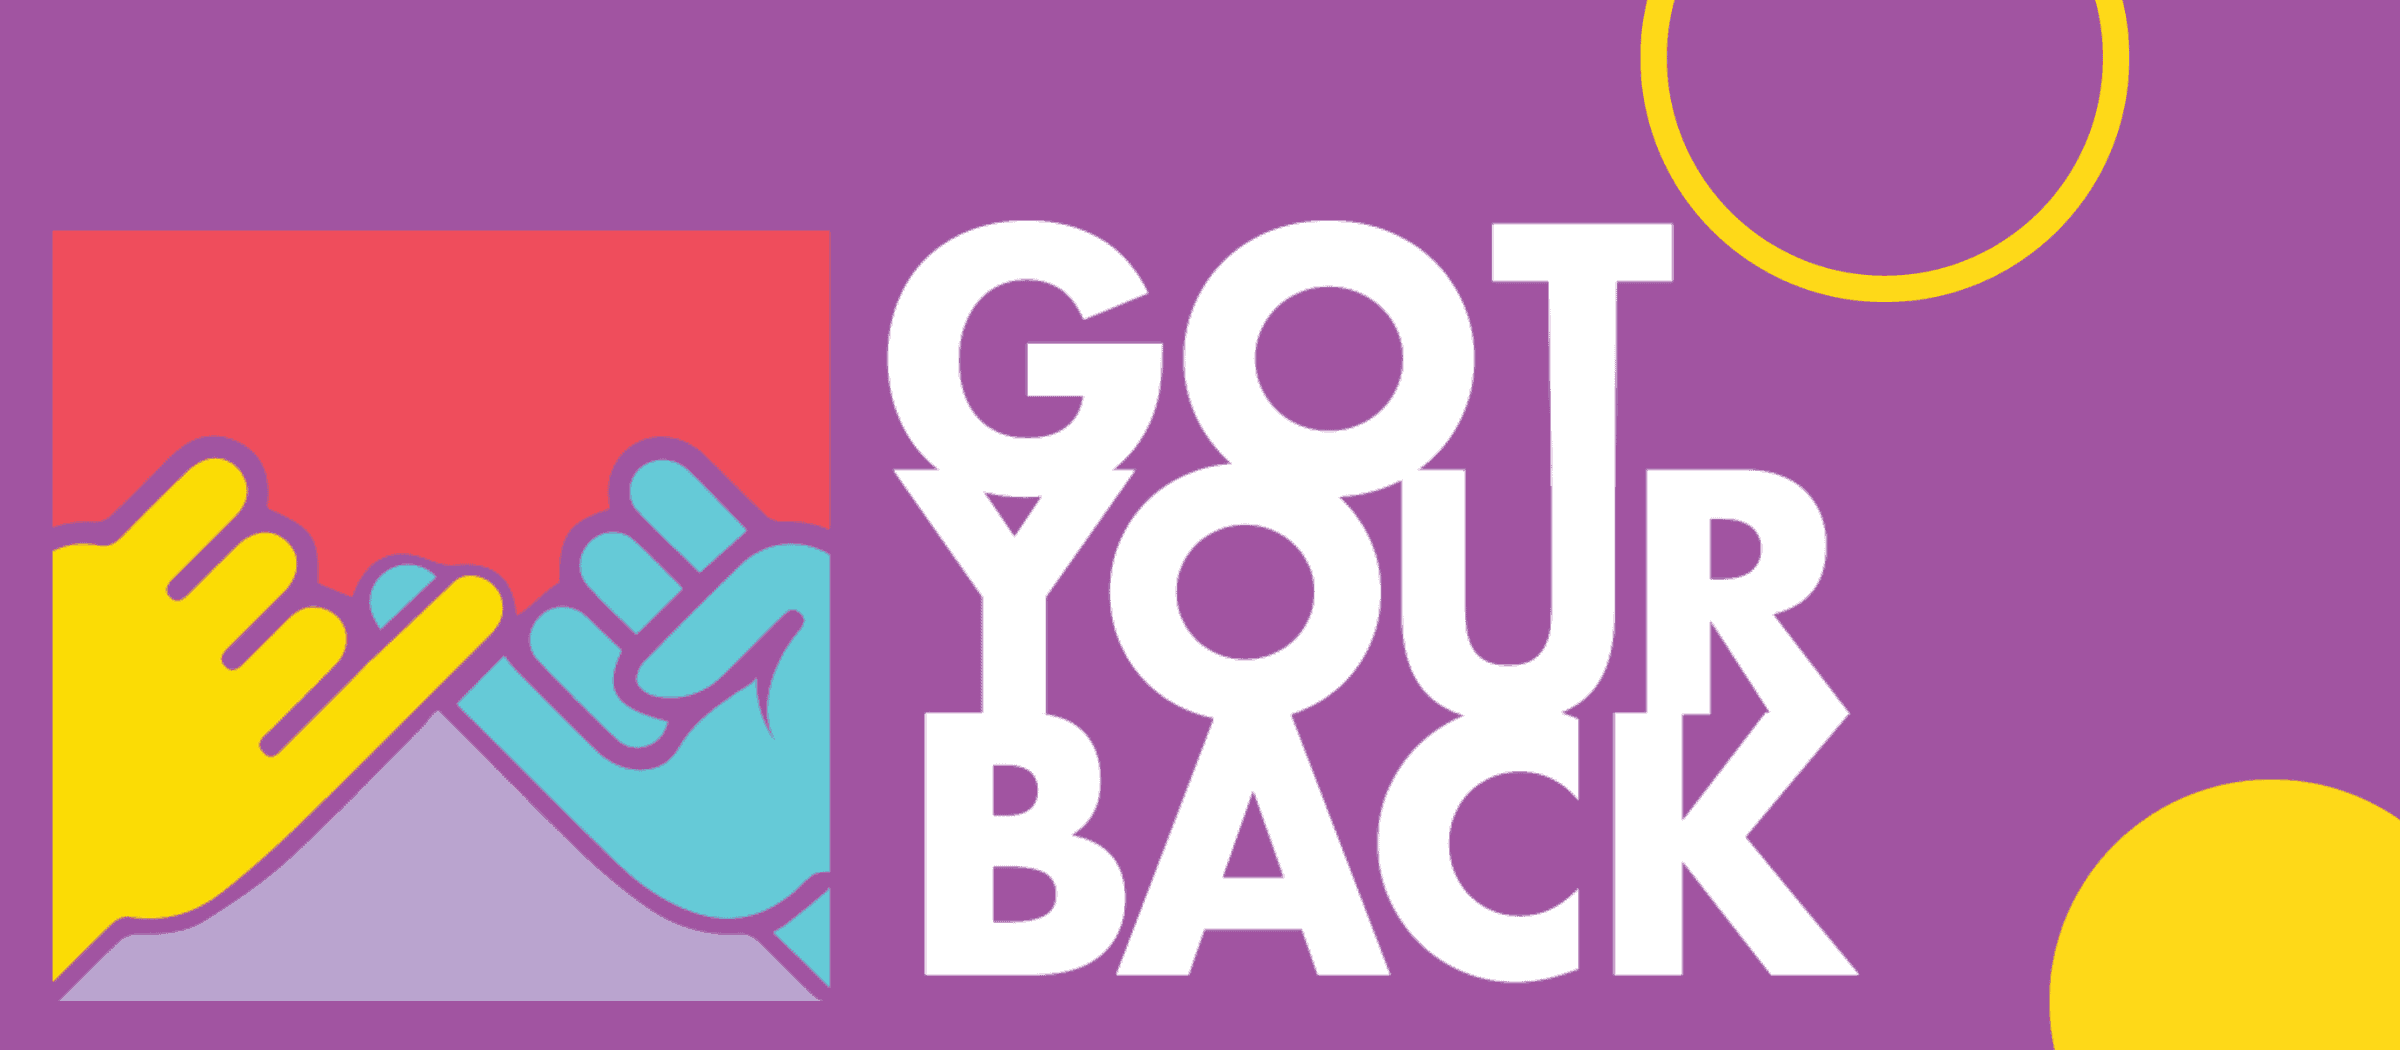 Got your back campaign banner